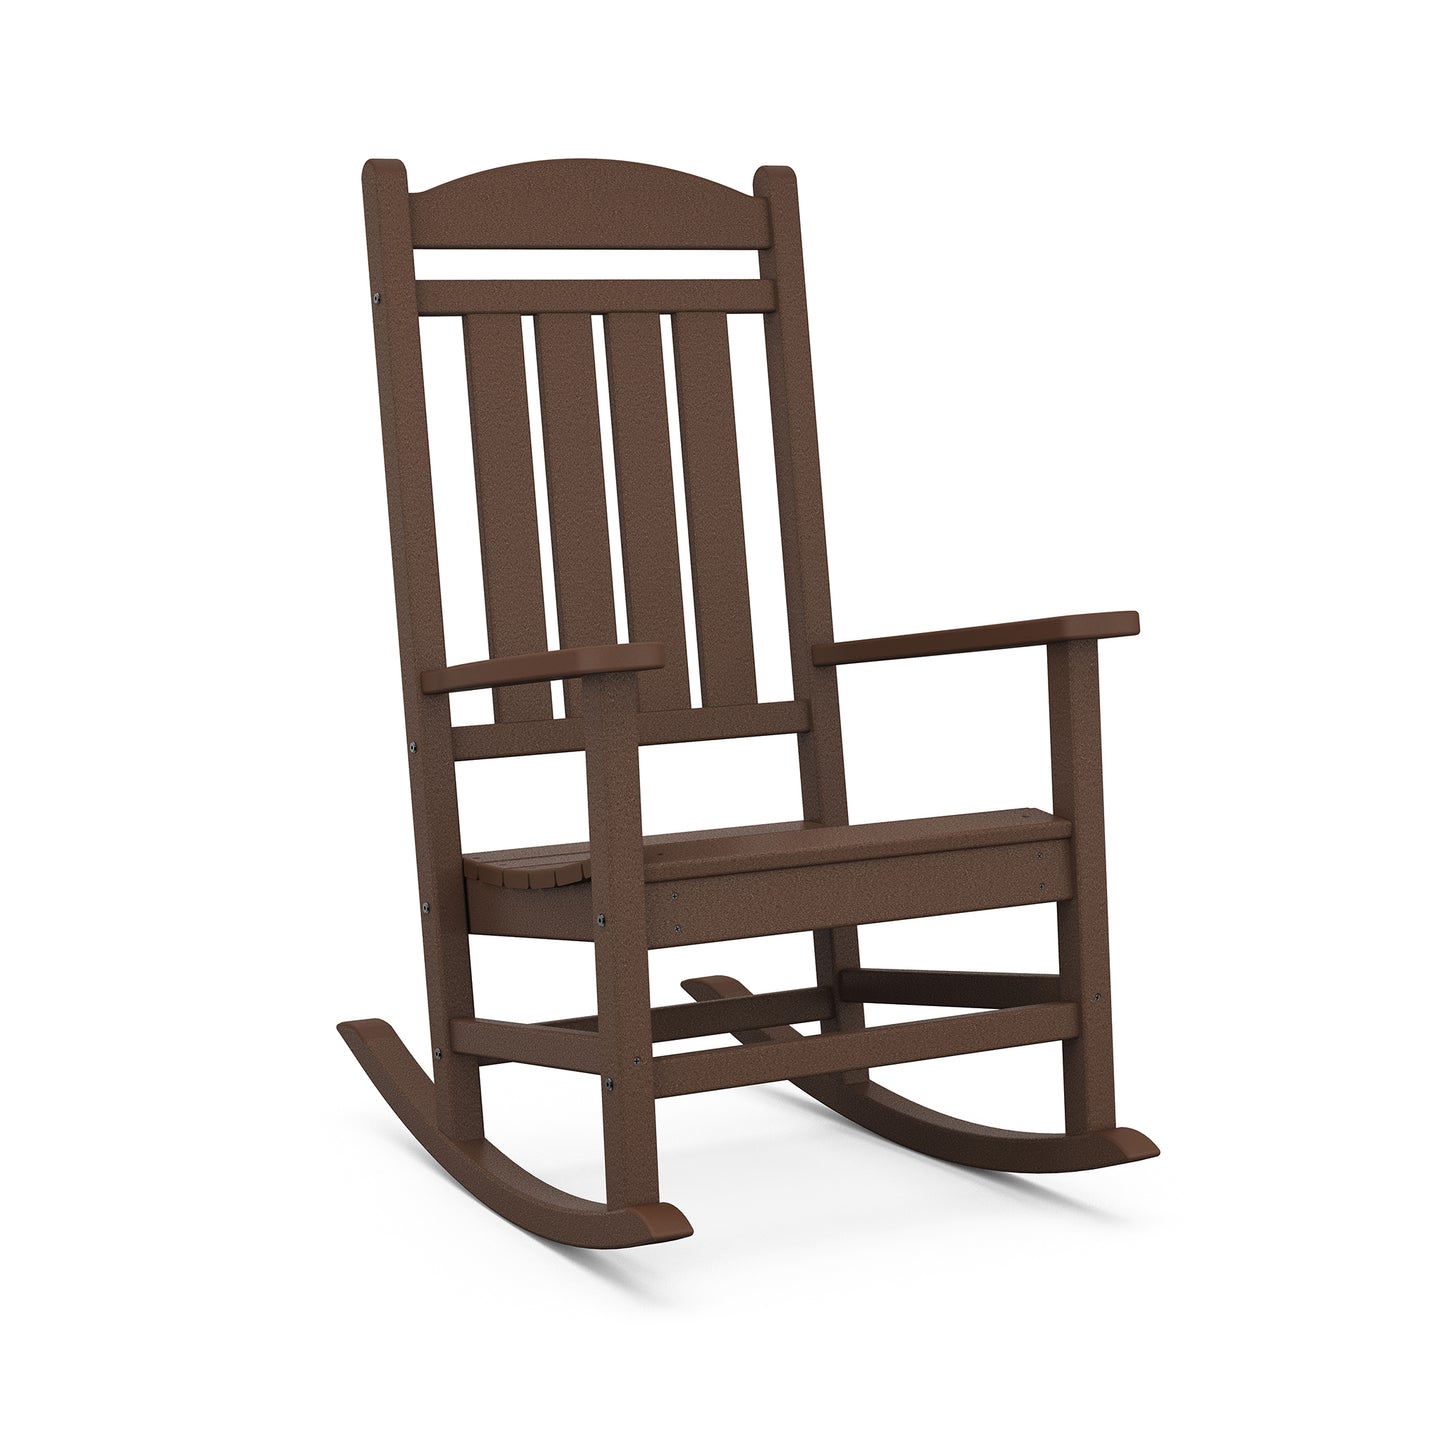 A brown traditional POLYWOOD© Presidential Outdoor Rocking Chair isolated on a white background, featuring vertical slat back and seat design with curved rockers.